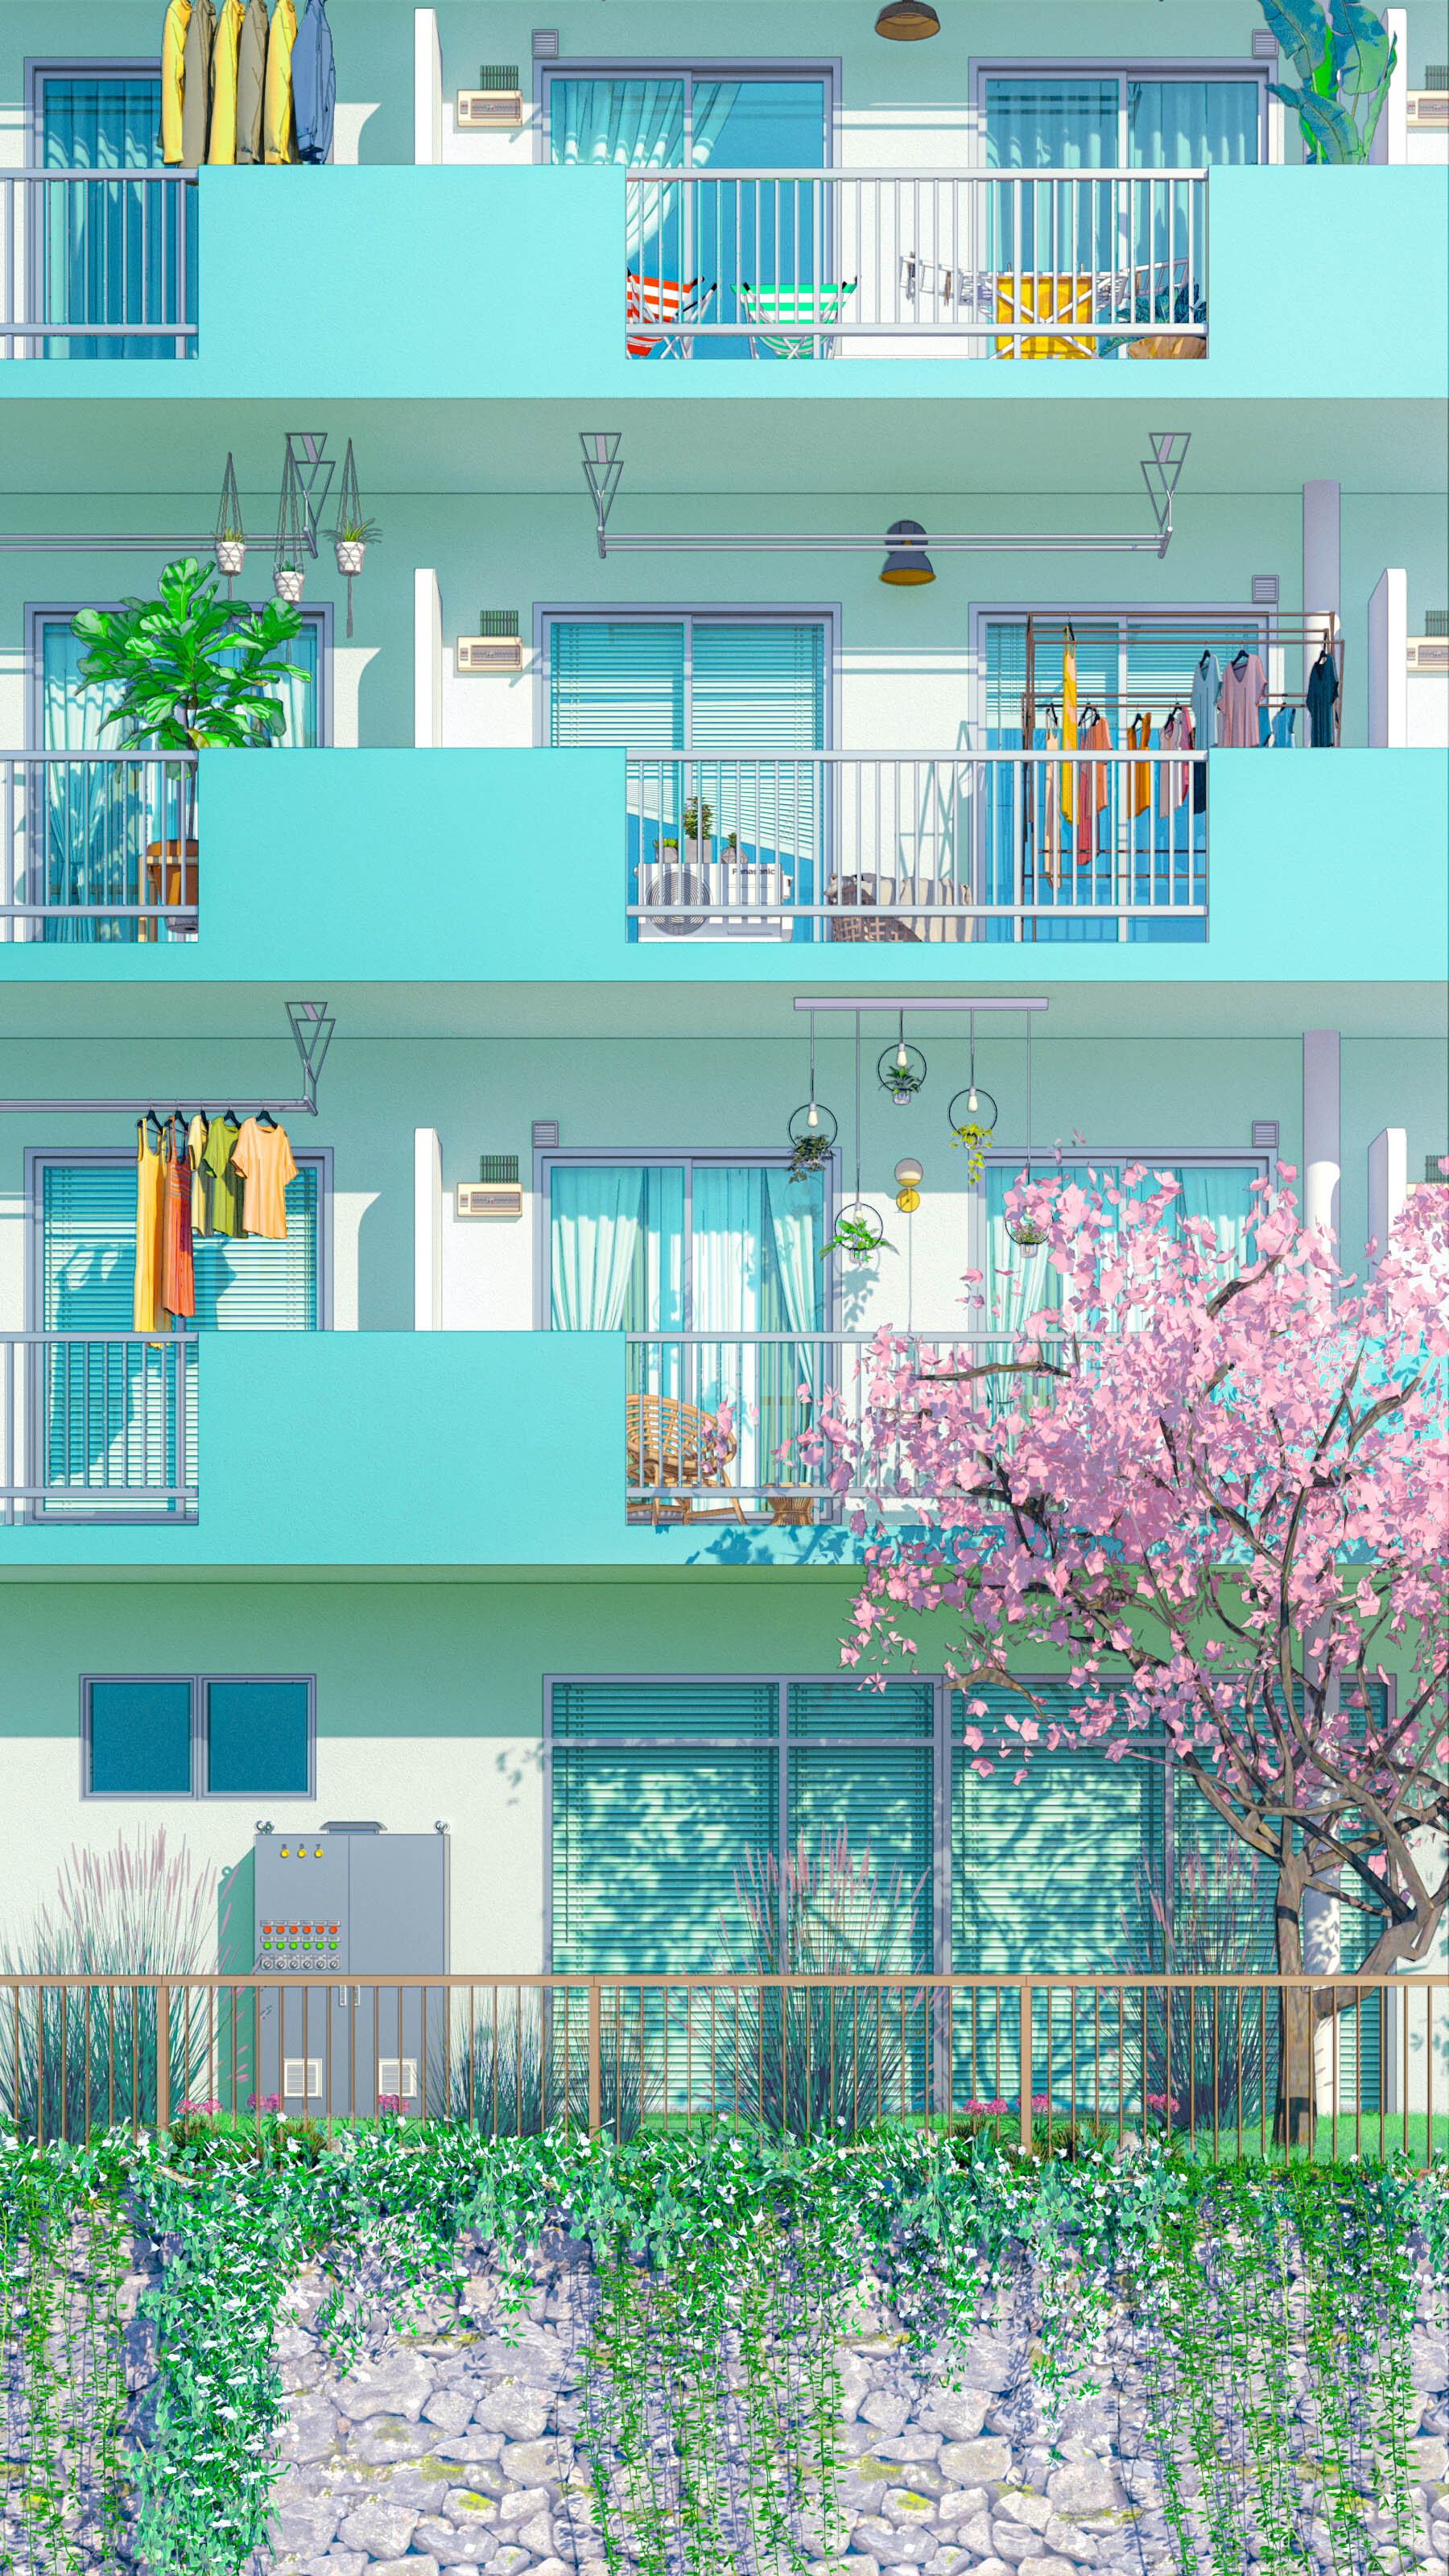 General 1800x3200 artwork digital art building balcony trees washing clothes deck chairs apartments ivy flowerpot